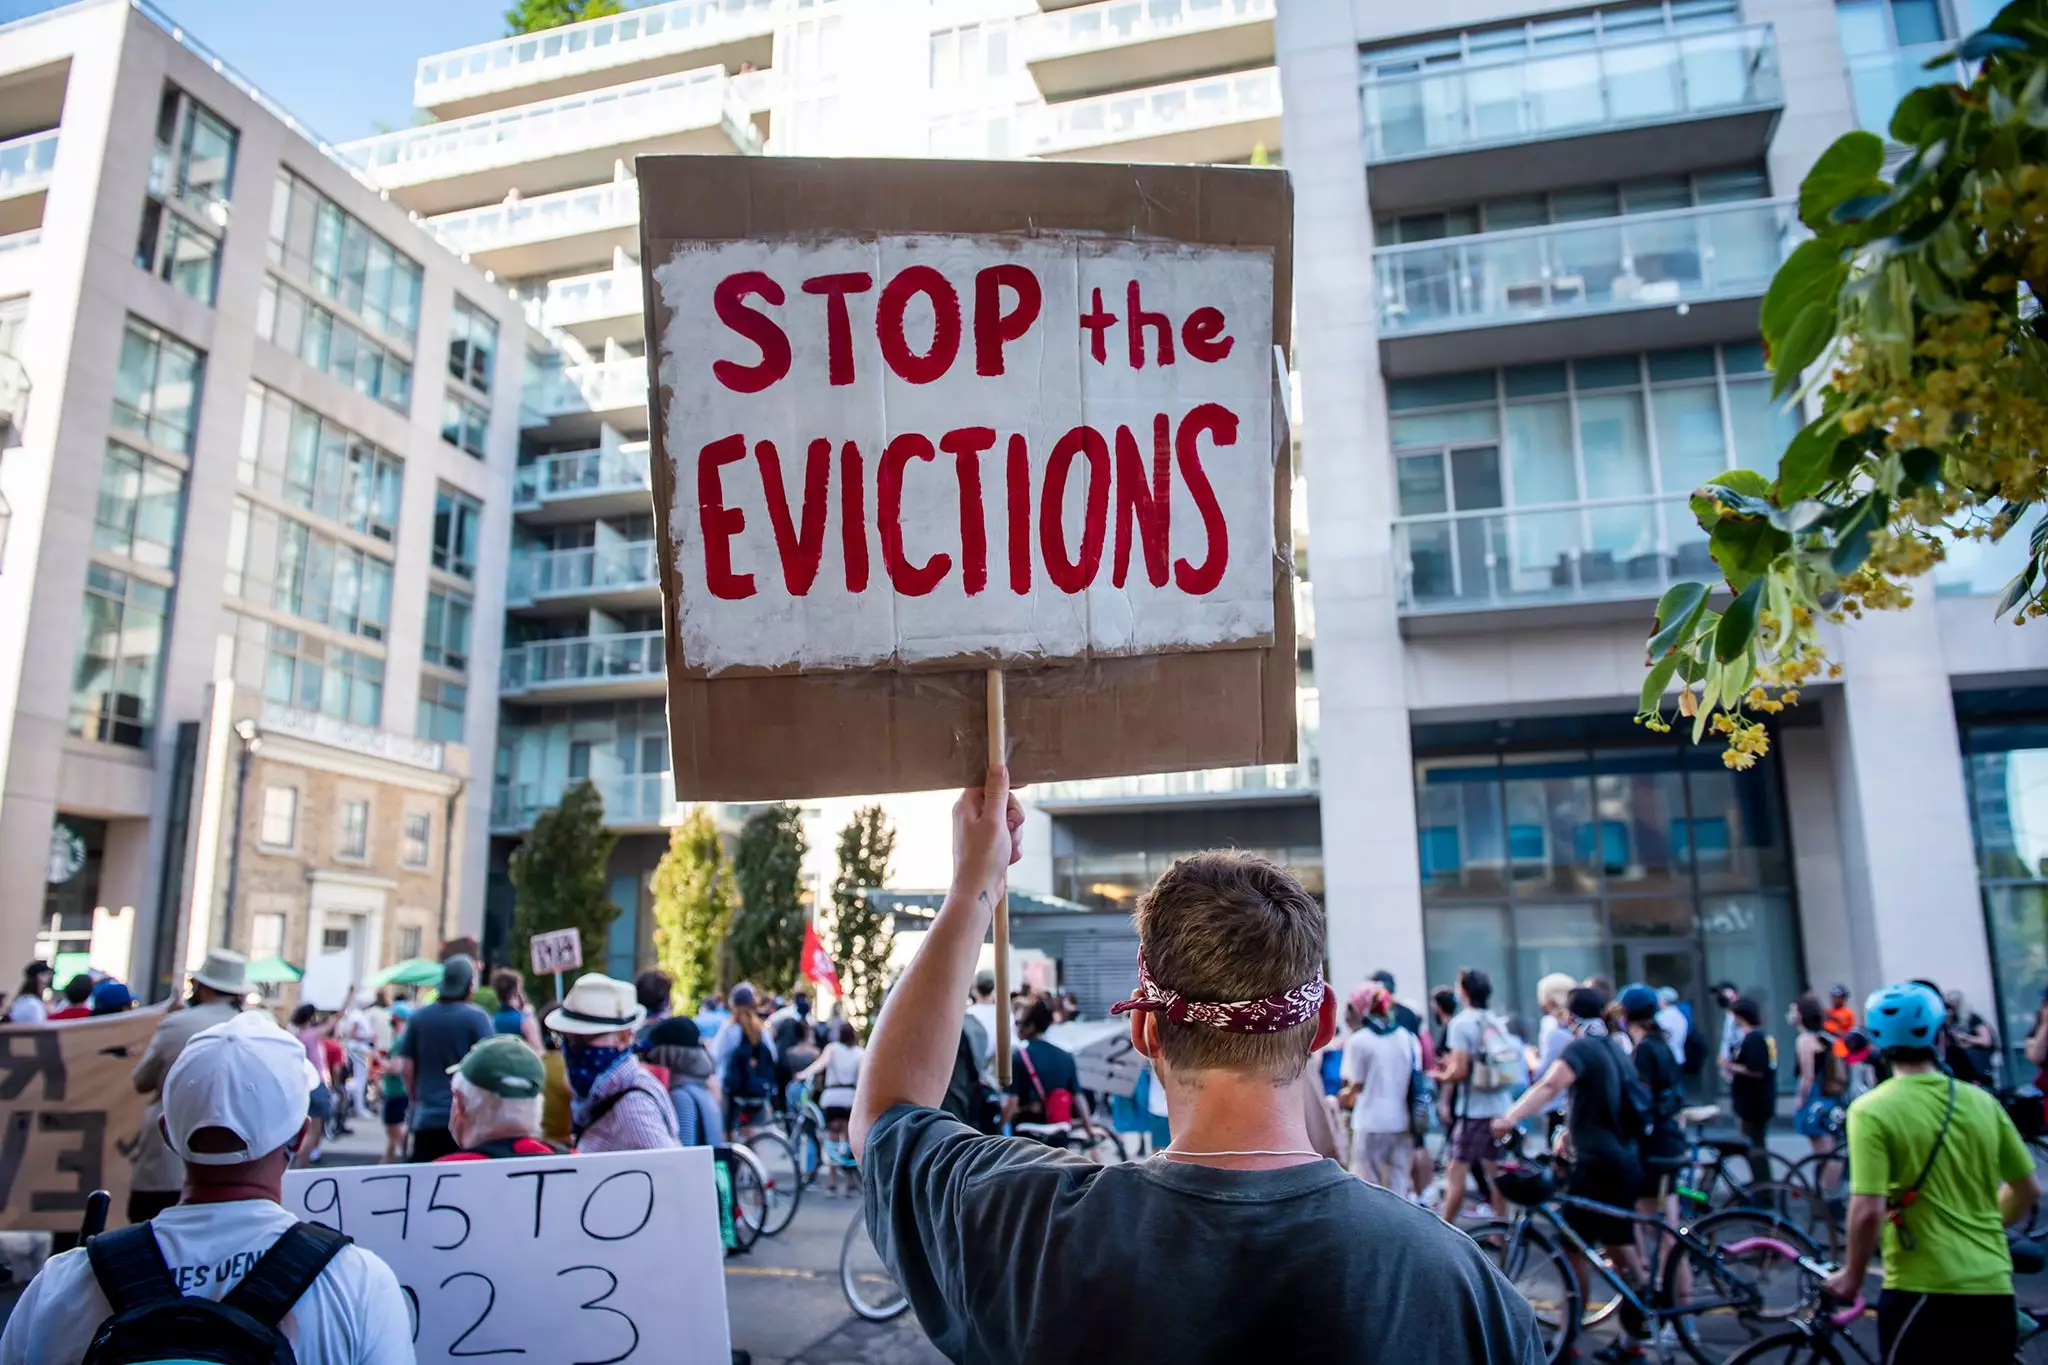 HERE ARE THE DETAILS OF THE RESIDENTIAL EVICTION BAN UNDER ONTARIO’S STAY-AT-HOME ORDER